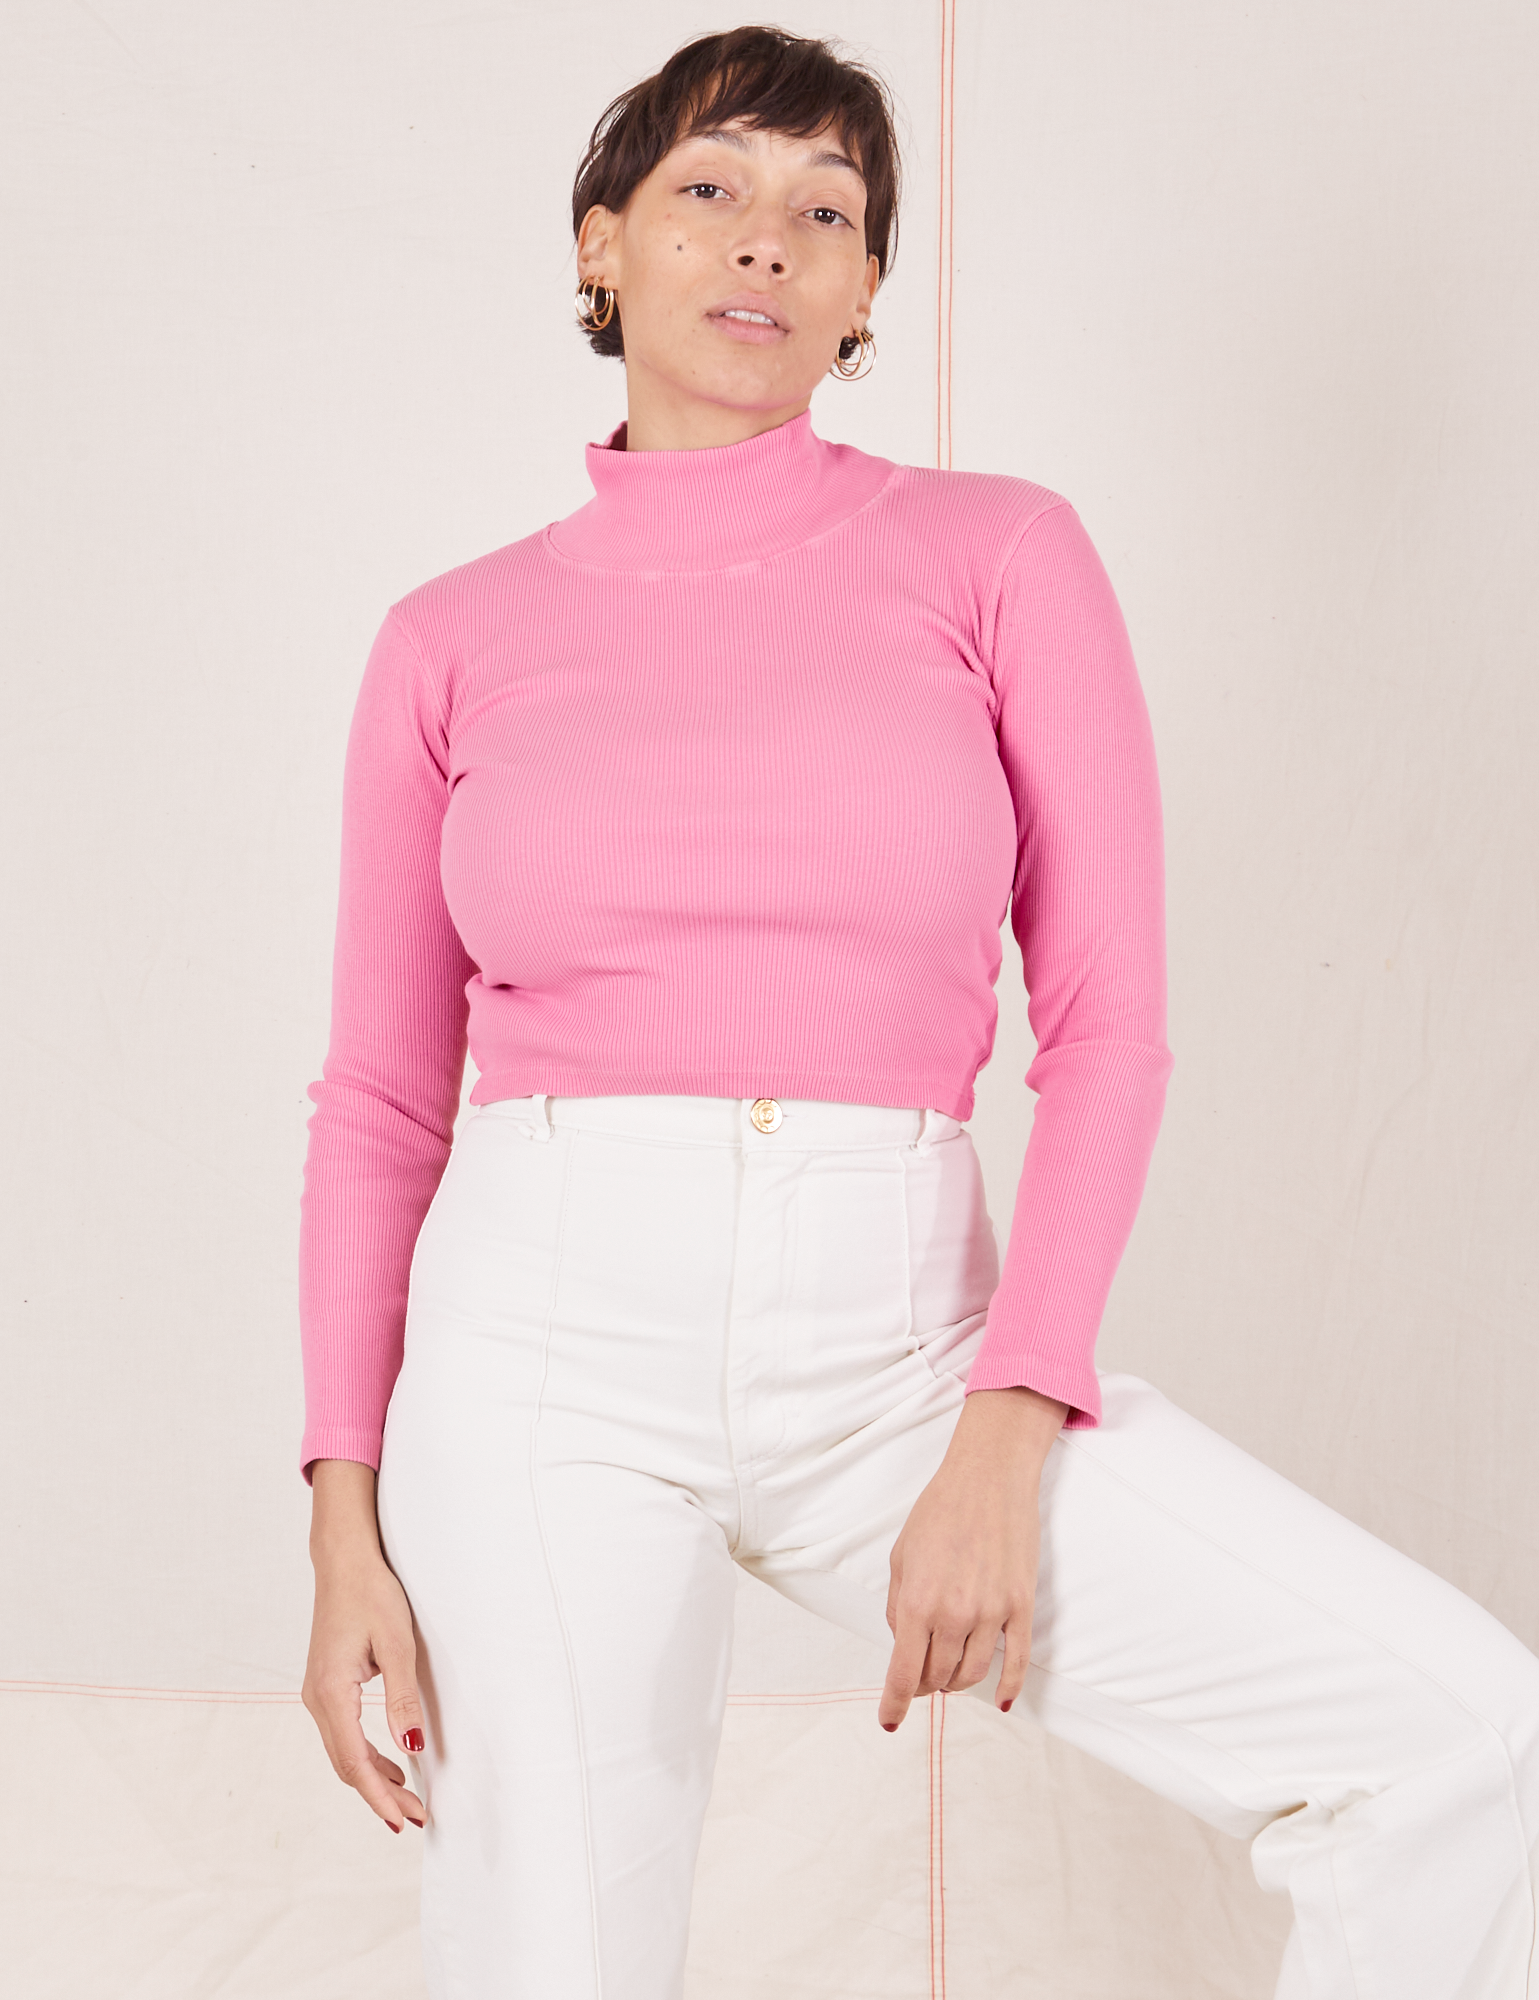 Tiara is wearing XS Essential Turtleneck in Bubblegum Pink paired with vintage tee off-white Western Pants